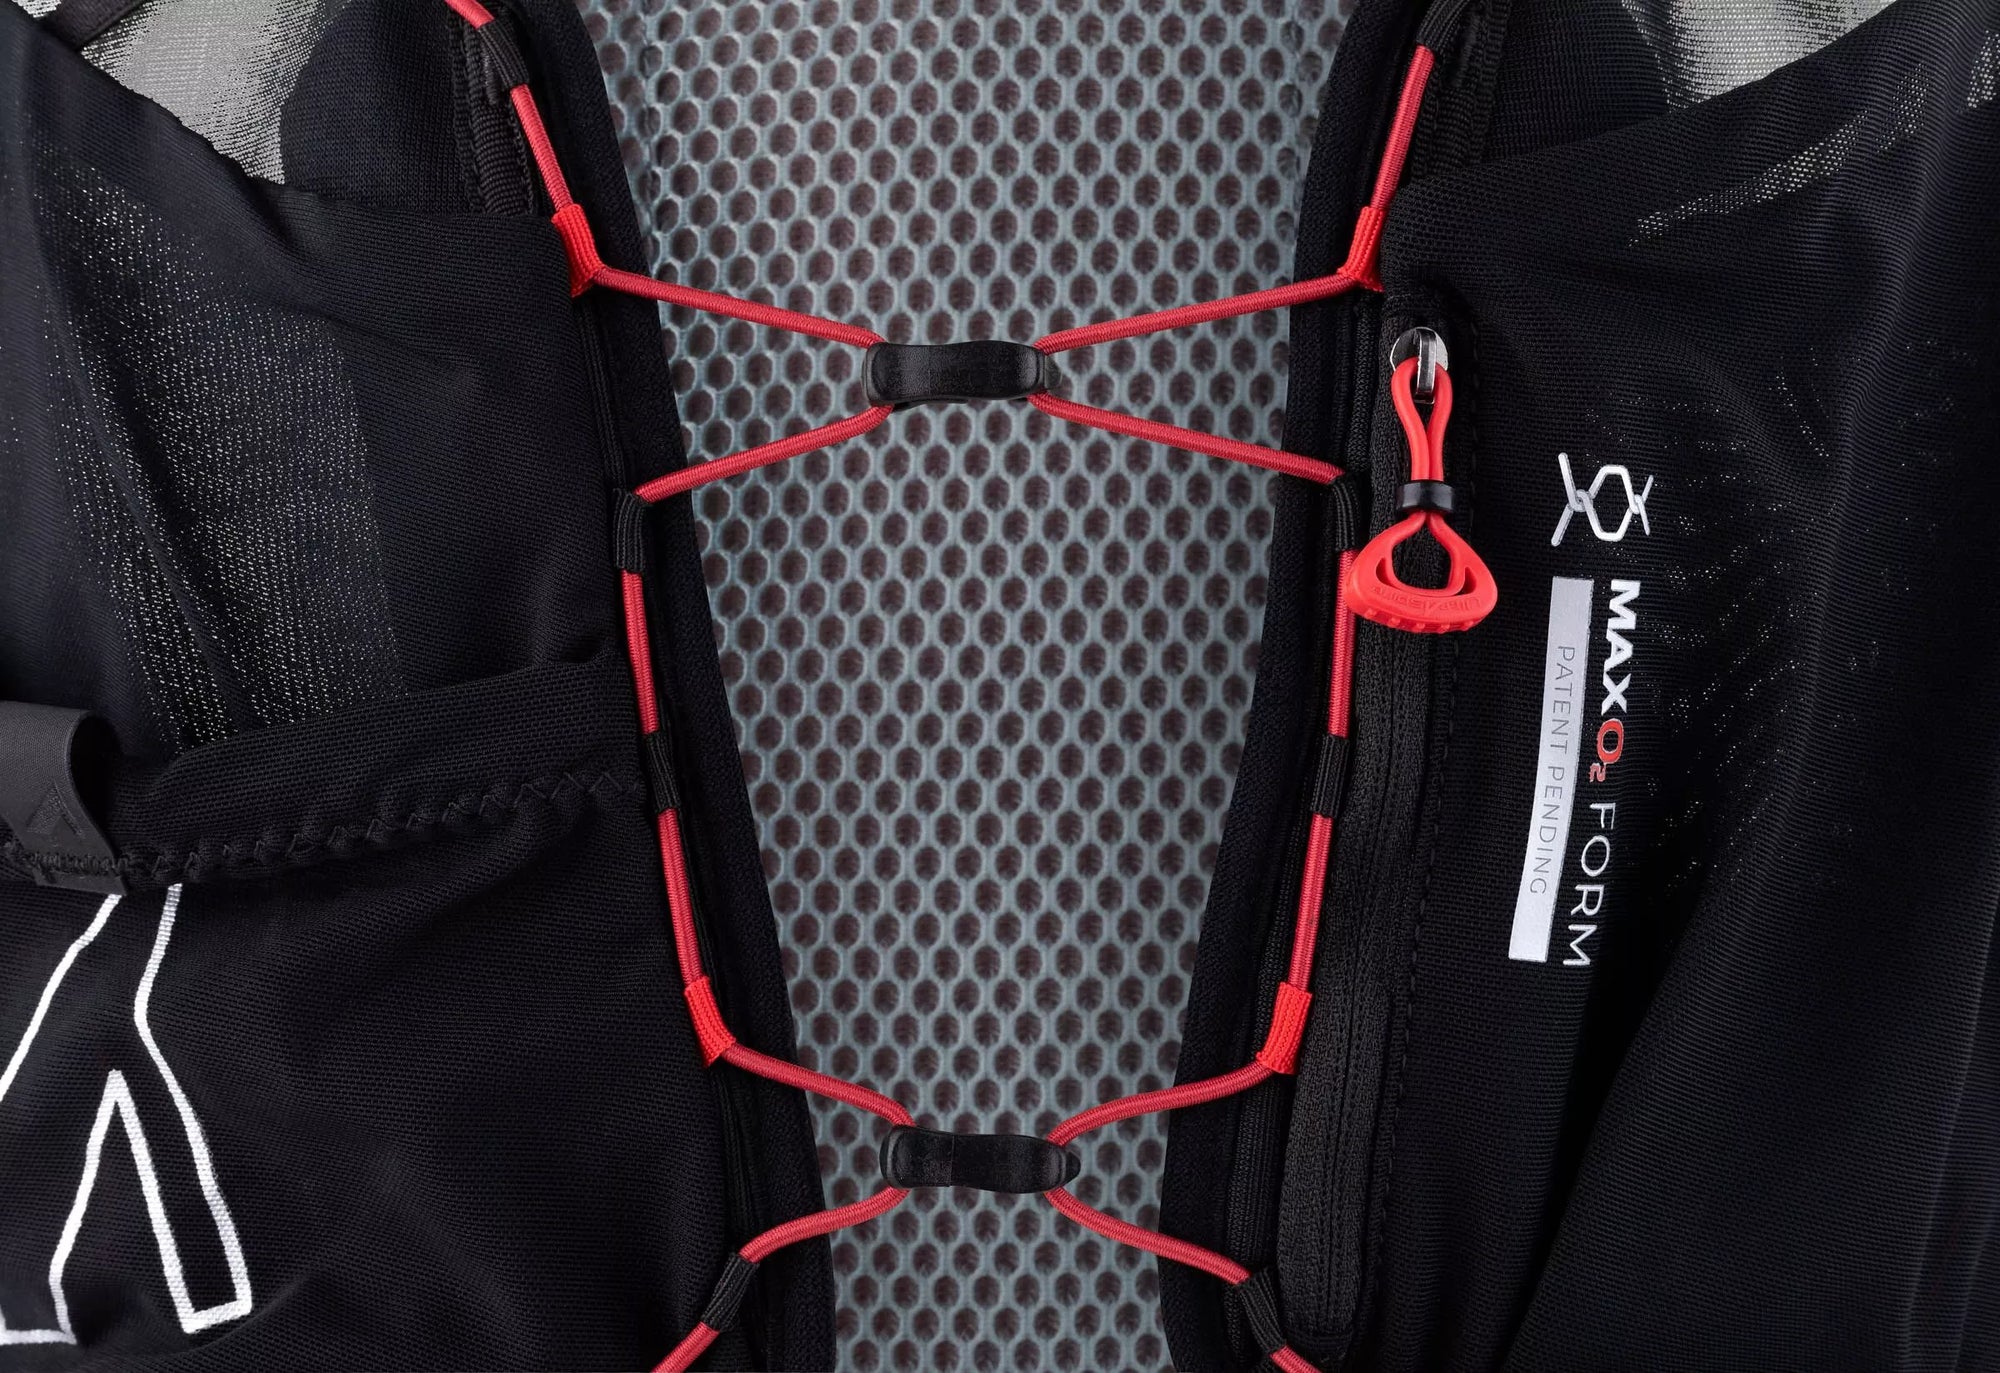 the ultraspire zygos 5 hydration vest showing front attachement system